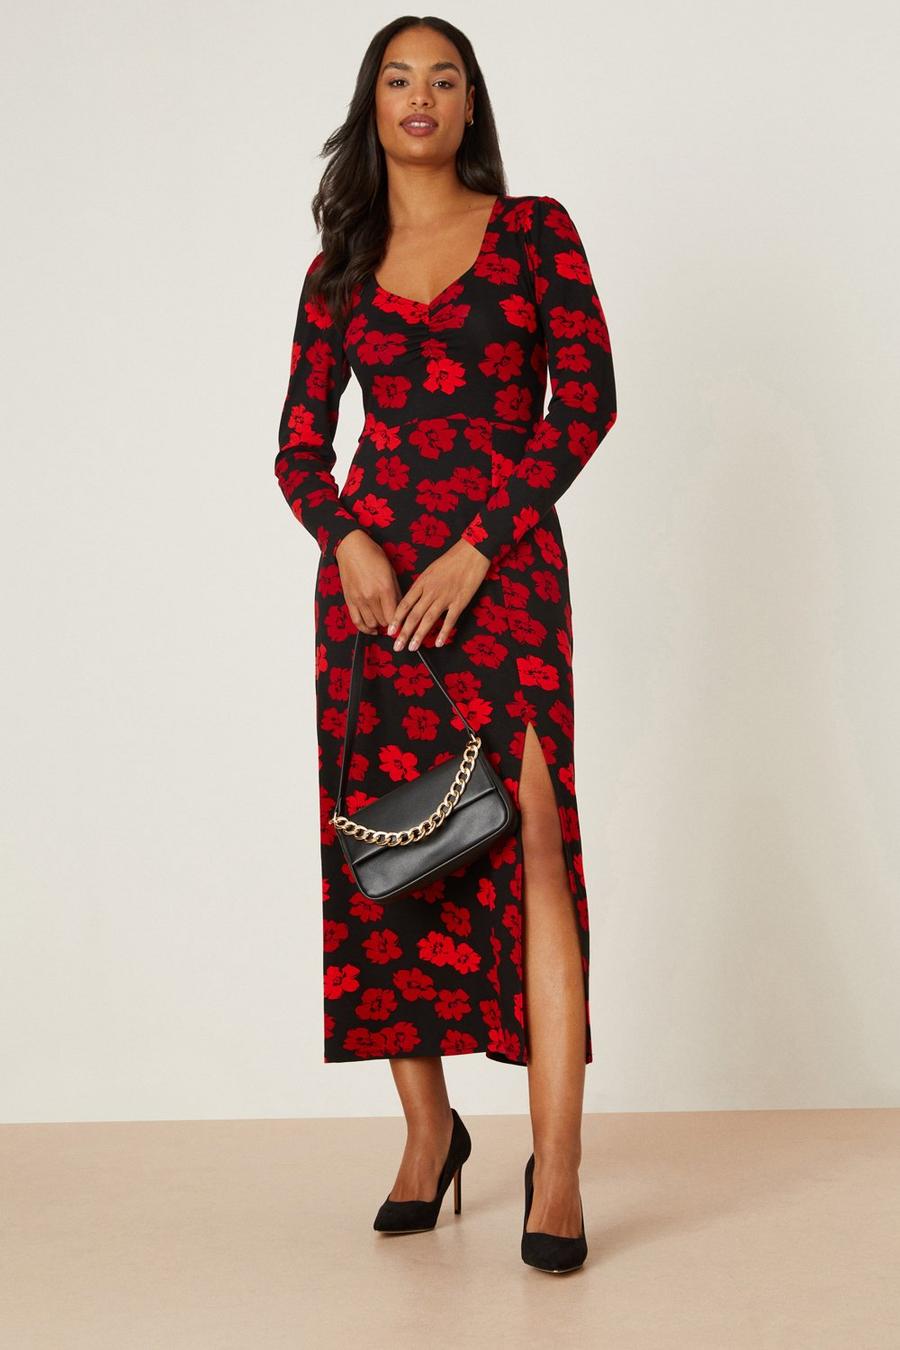 Cora Long Sleeve Red Floral Midi Dress